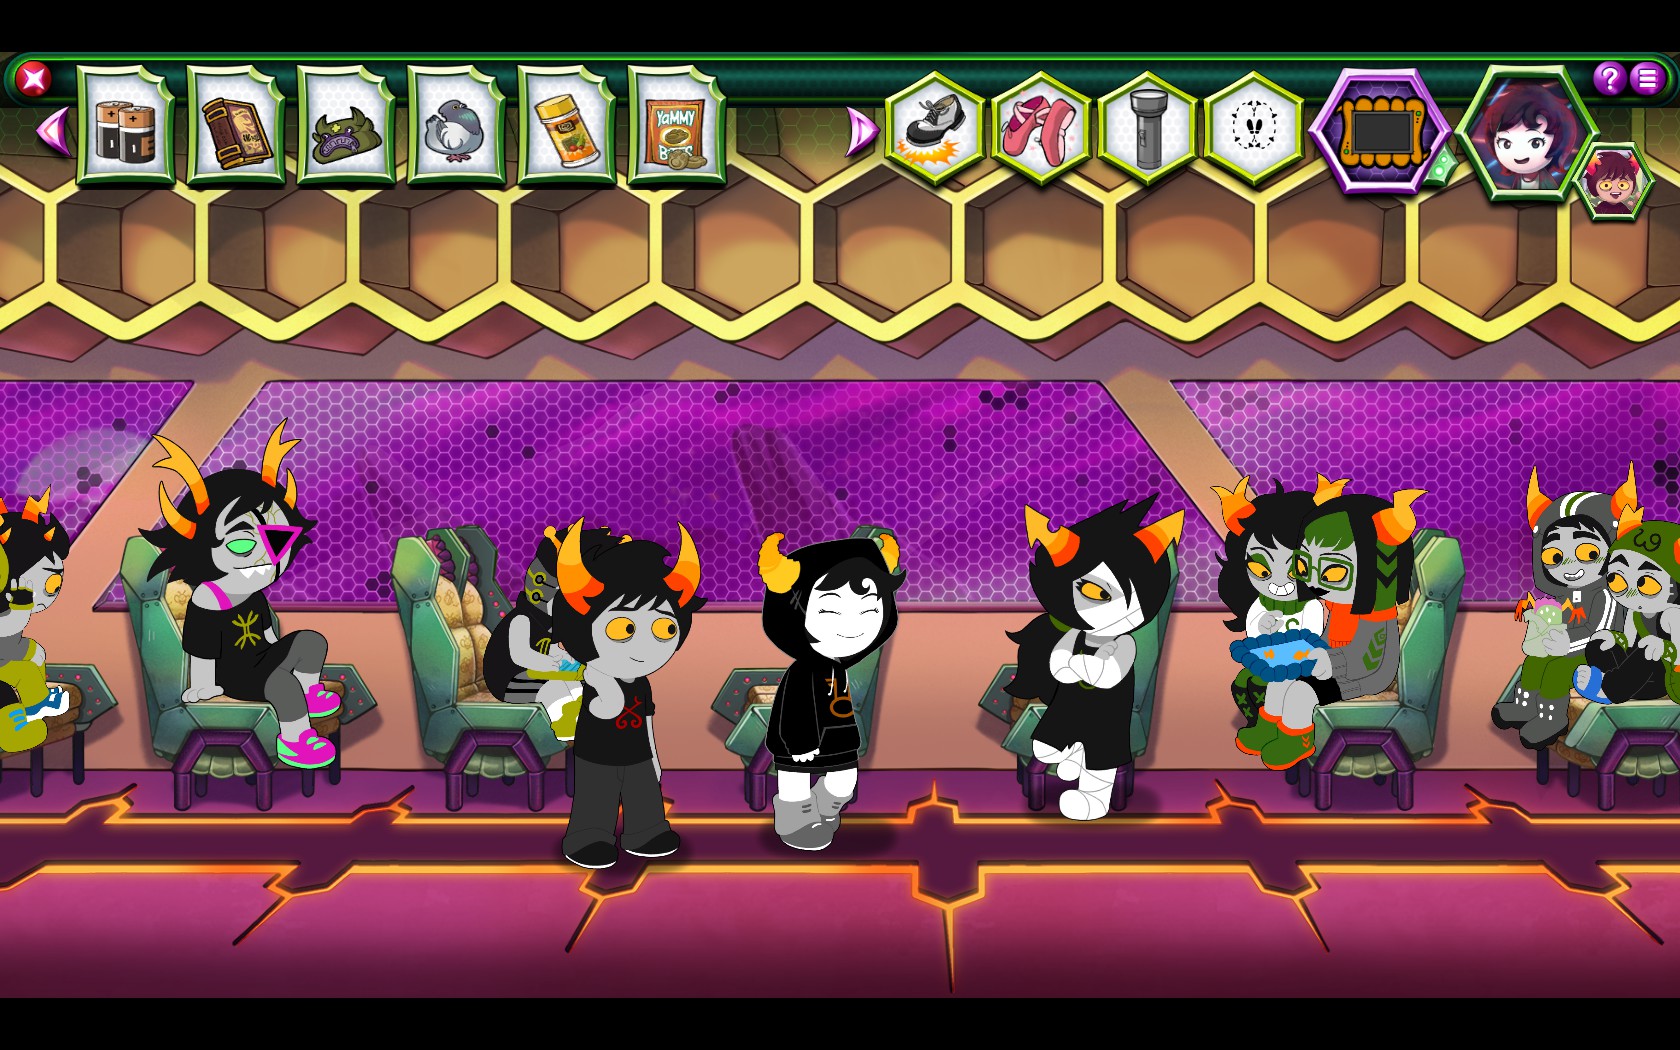 will there be a hiveswap act 2